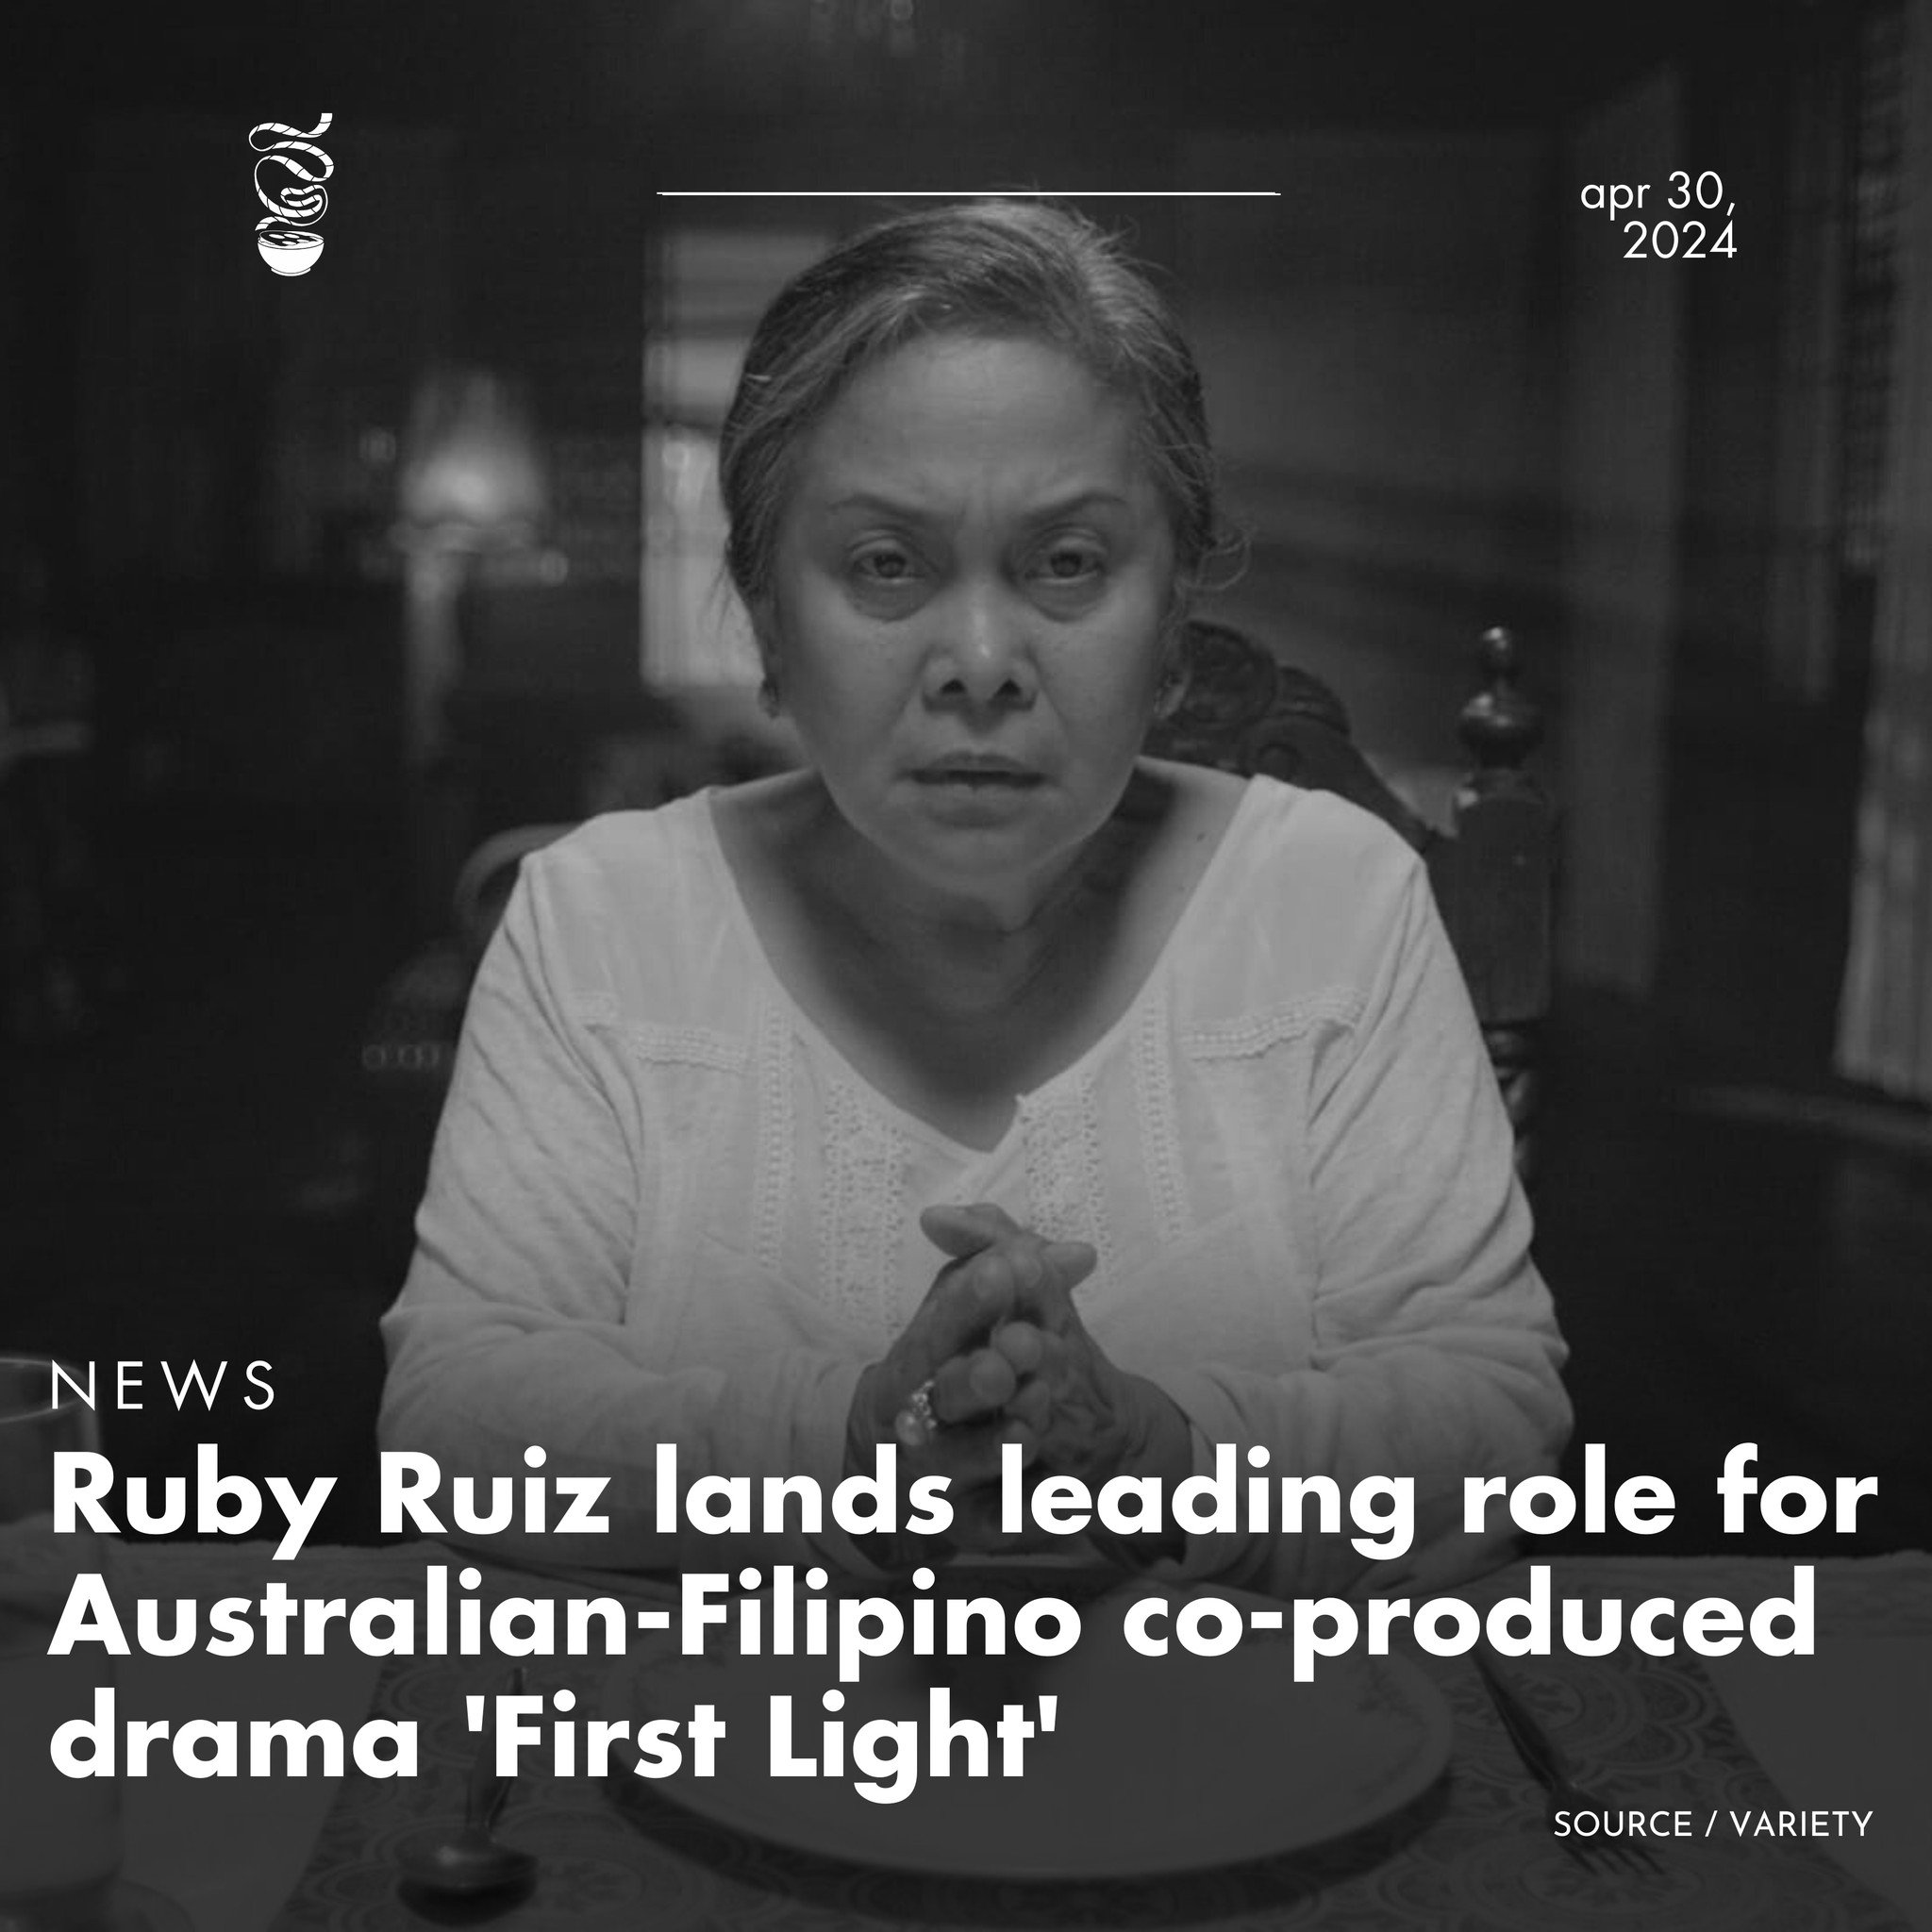 RUBY RUIZ WORLD DOMINATION!

After starring in &lsquo;Expats&rsquo;, Ruiz will lead in James J. Robinson's directorial debut feature, &lsquo;First Light.&rsquo; The Australian-Filipino co-production centers on a nun who is pushed to face the ethical 